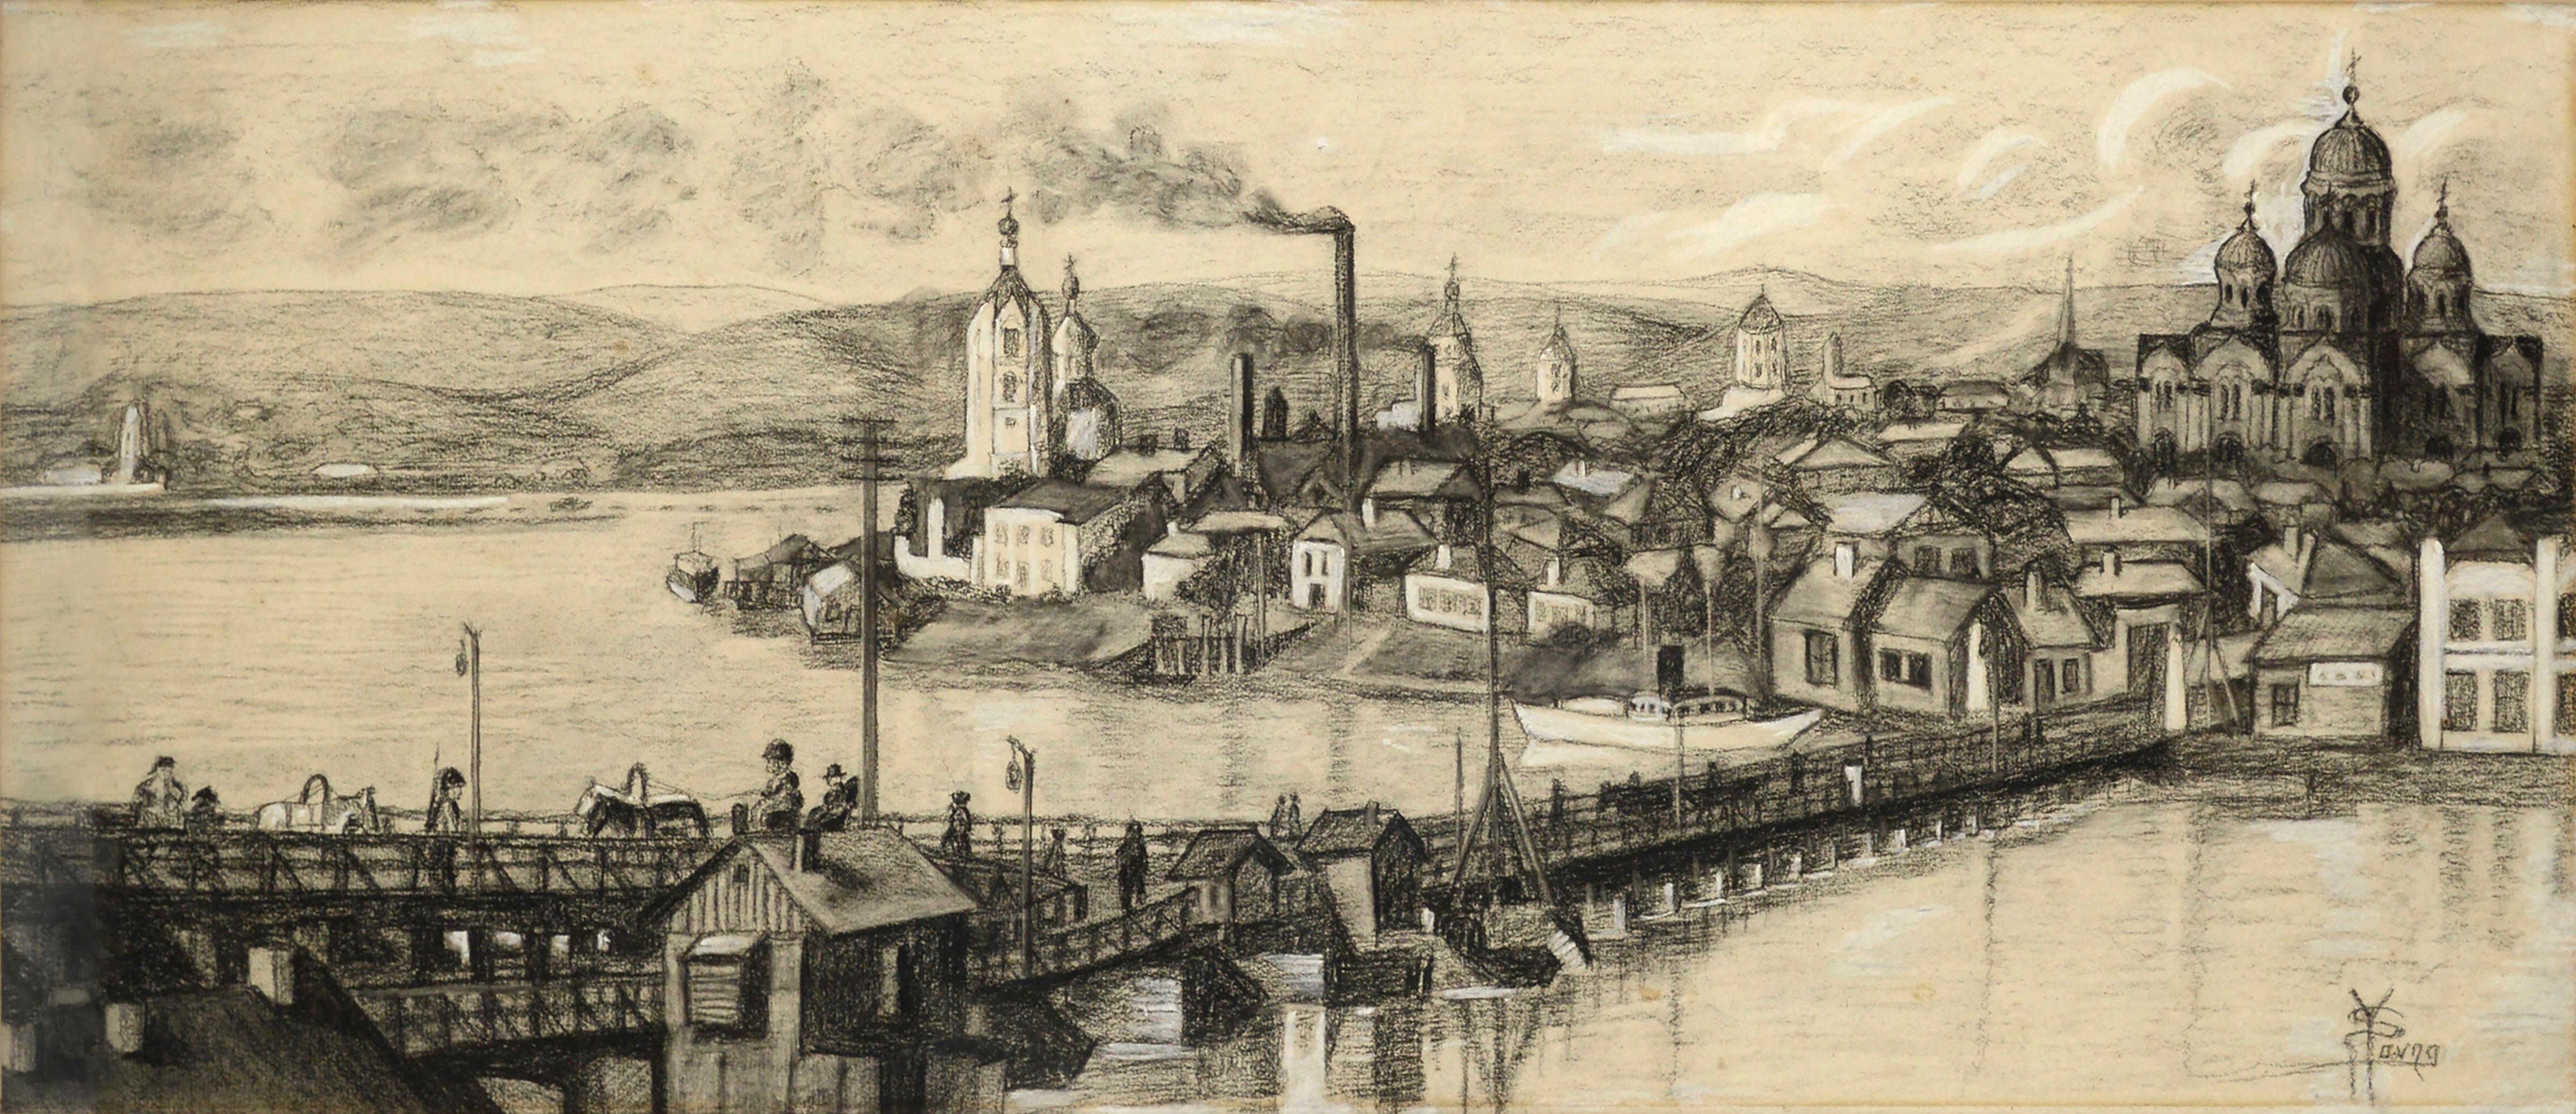 View of Tallinn, Estonia - Figurative Landscape Panoramic Charcoal Drawing  - Art by Unknown